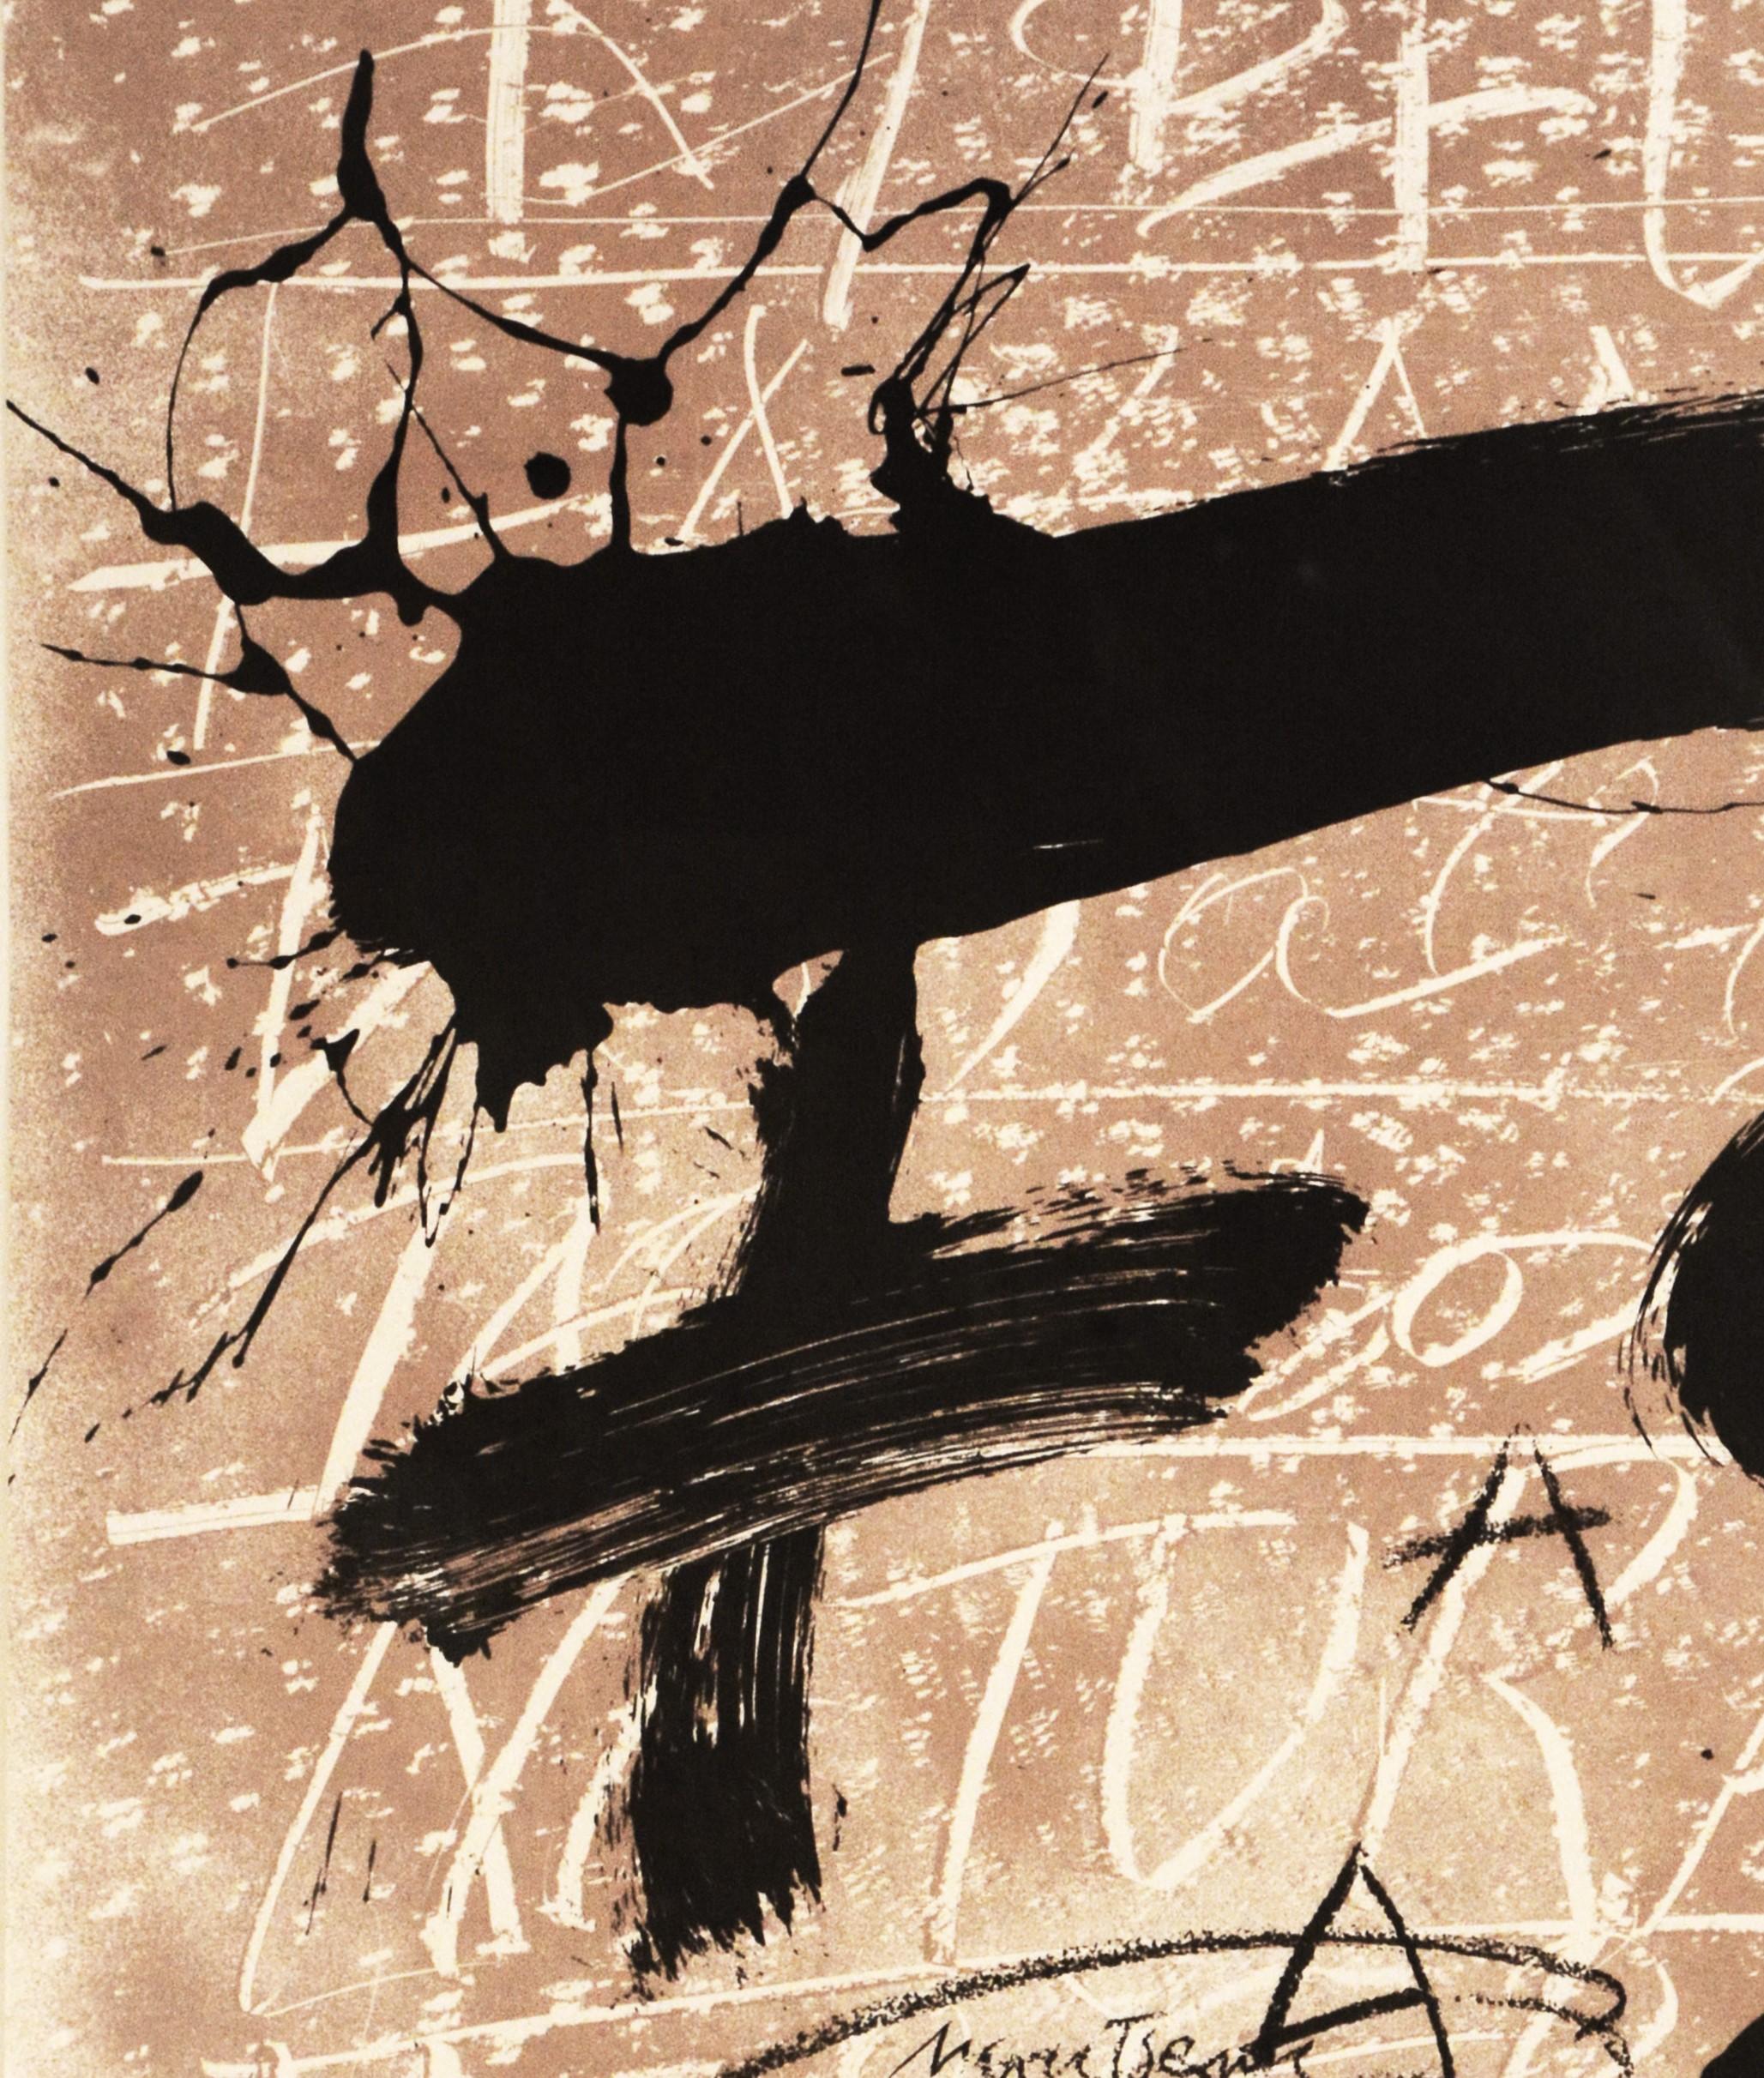 Antoni Tapies, Untitled, screenprint, signed, 1992 - Abstract Print by Antoni Tàpies